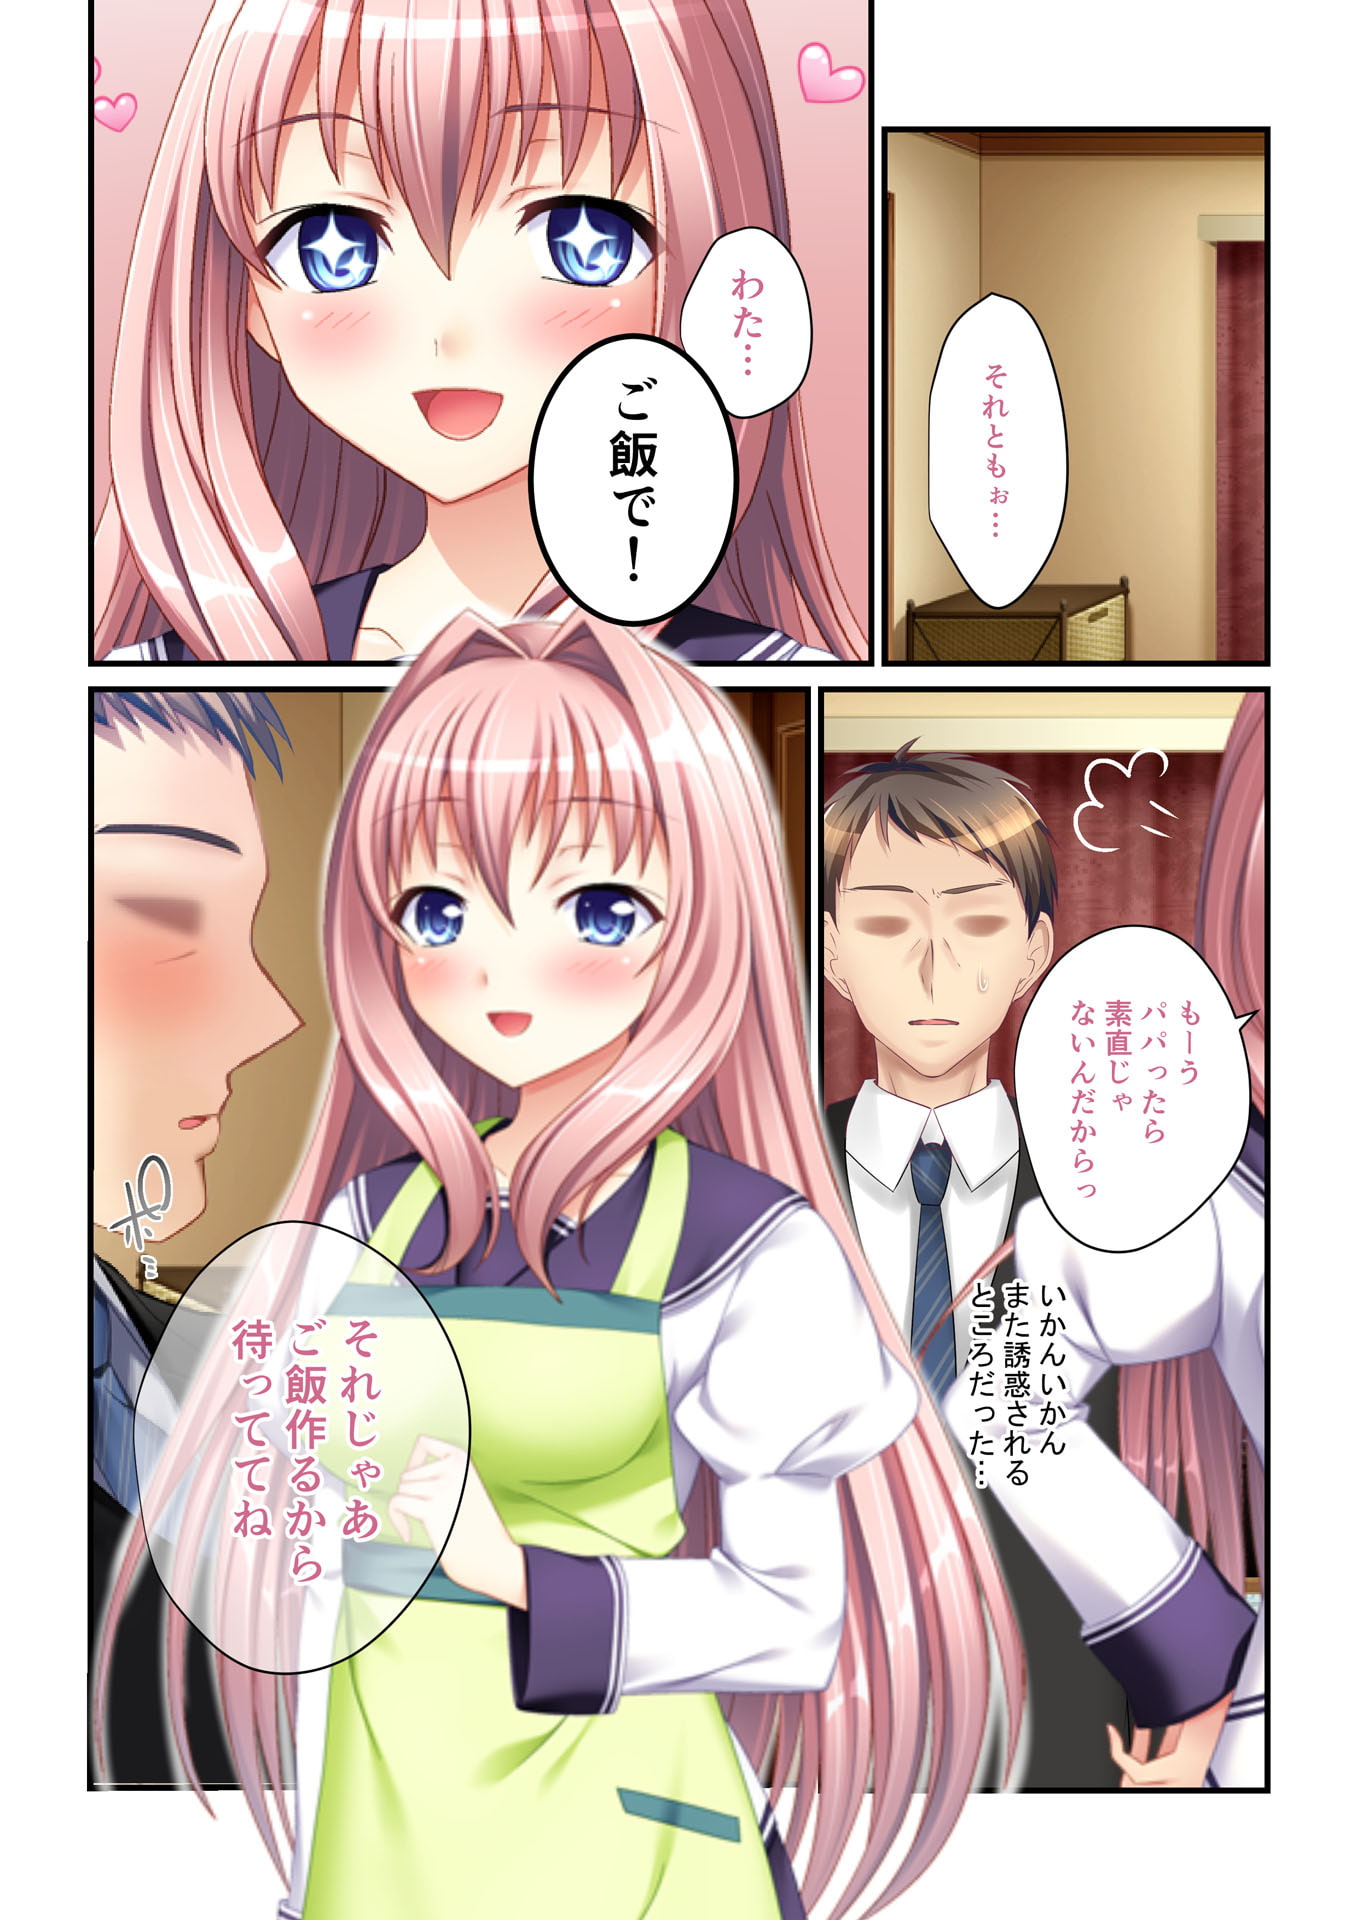 Papa Life Harem: Sexy Seduction by Step-Daughters (2) [Full Color Comic Ver]